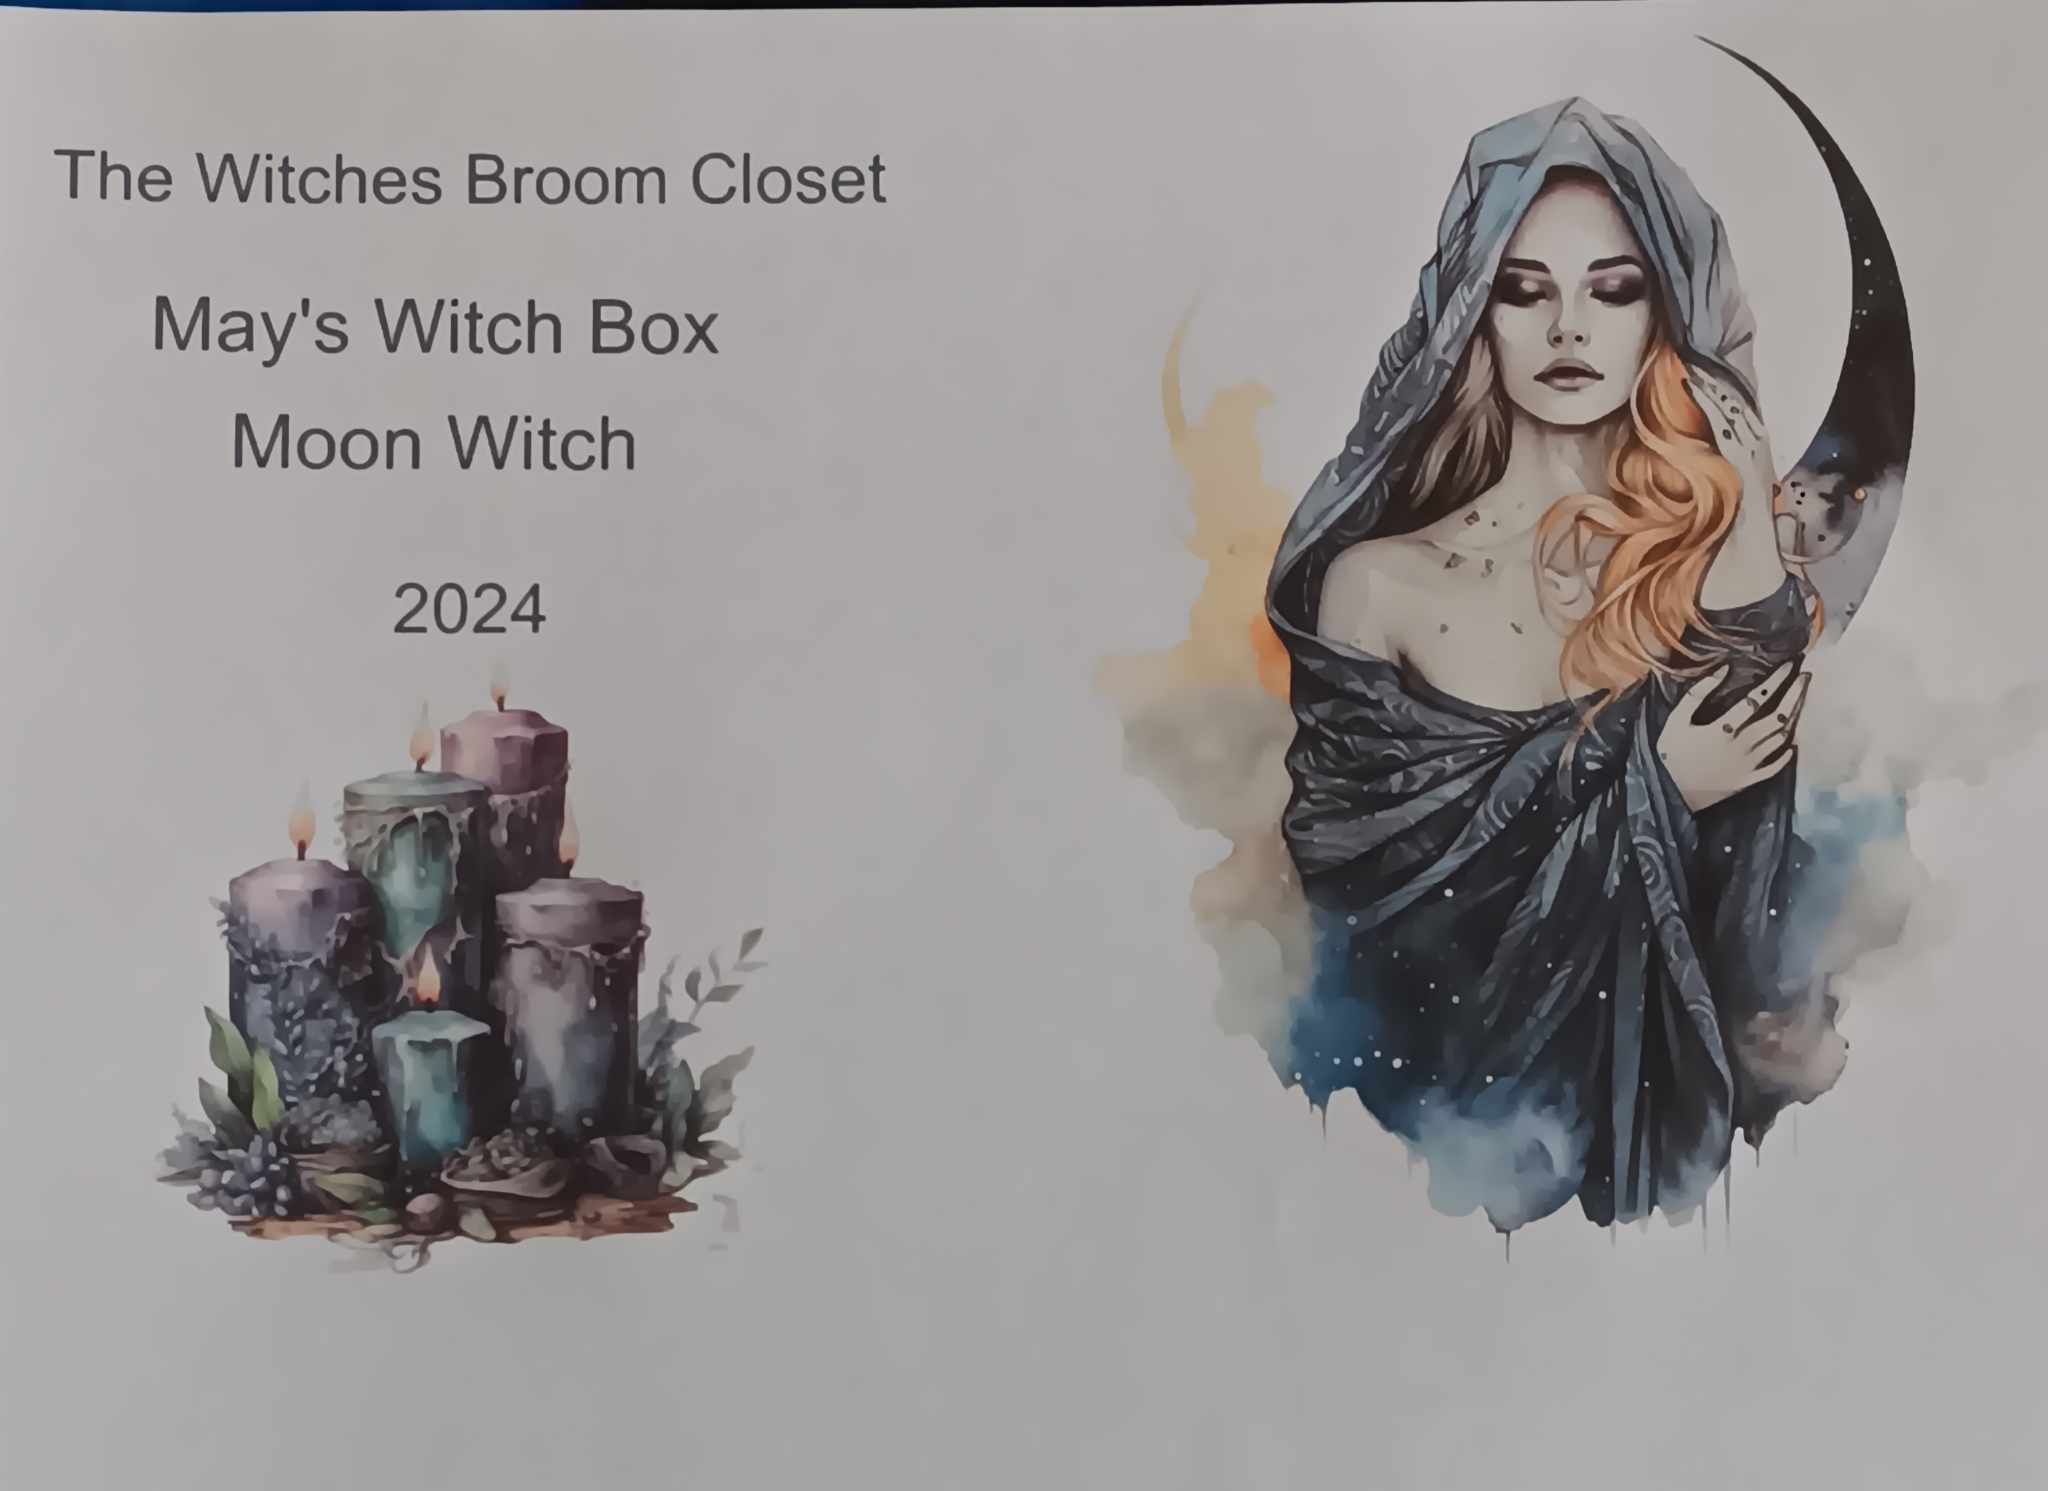 The Witches Broom Closet Witch Box *PRE-ORDER* (May 2024) Themed (Moon Witch)